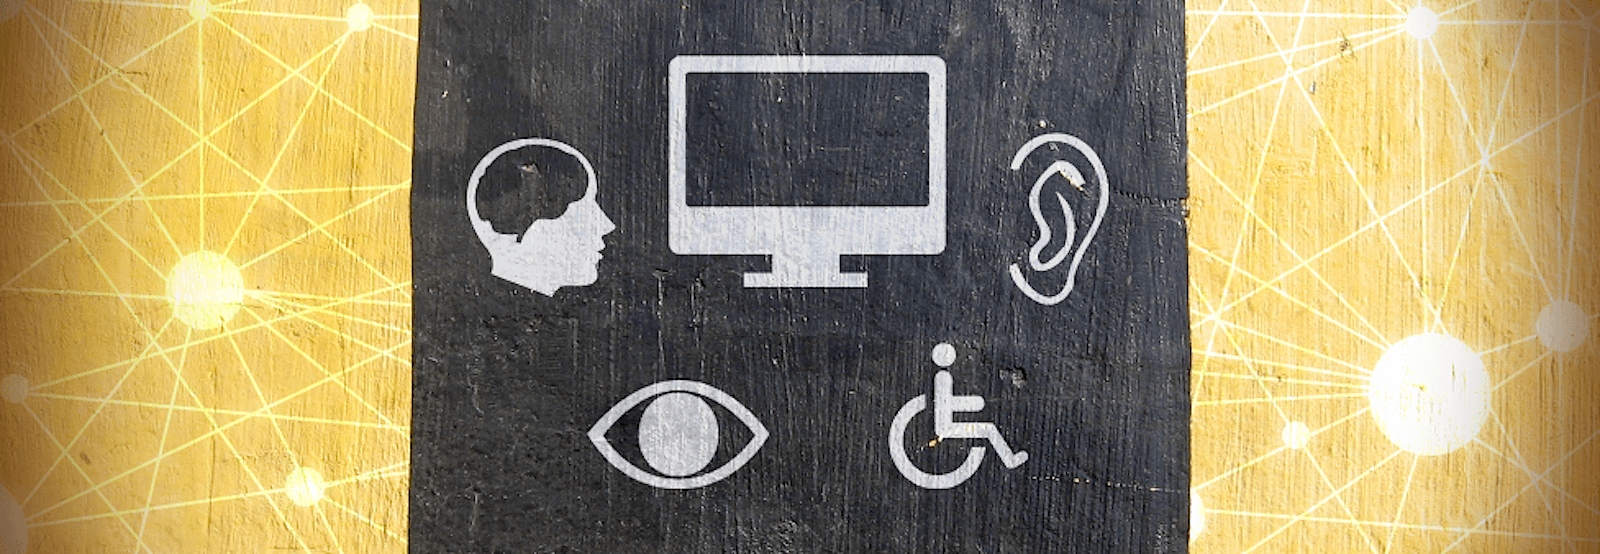 A Look at Web Accessibility – A Web For All